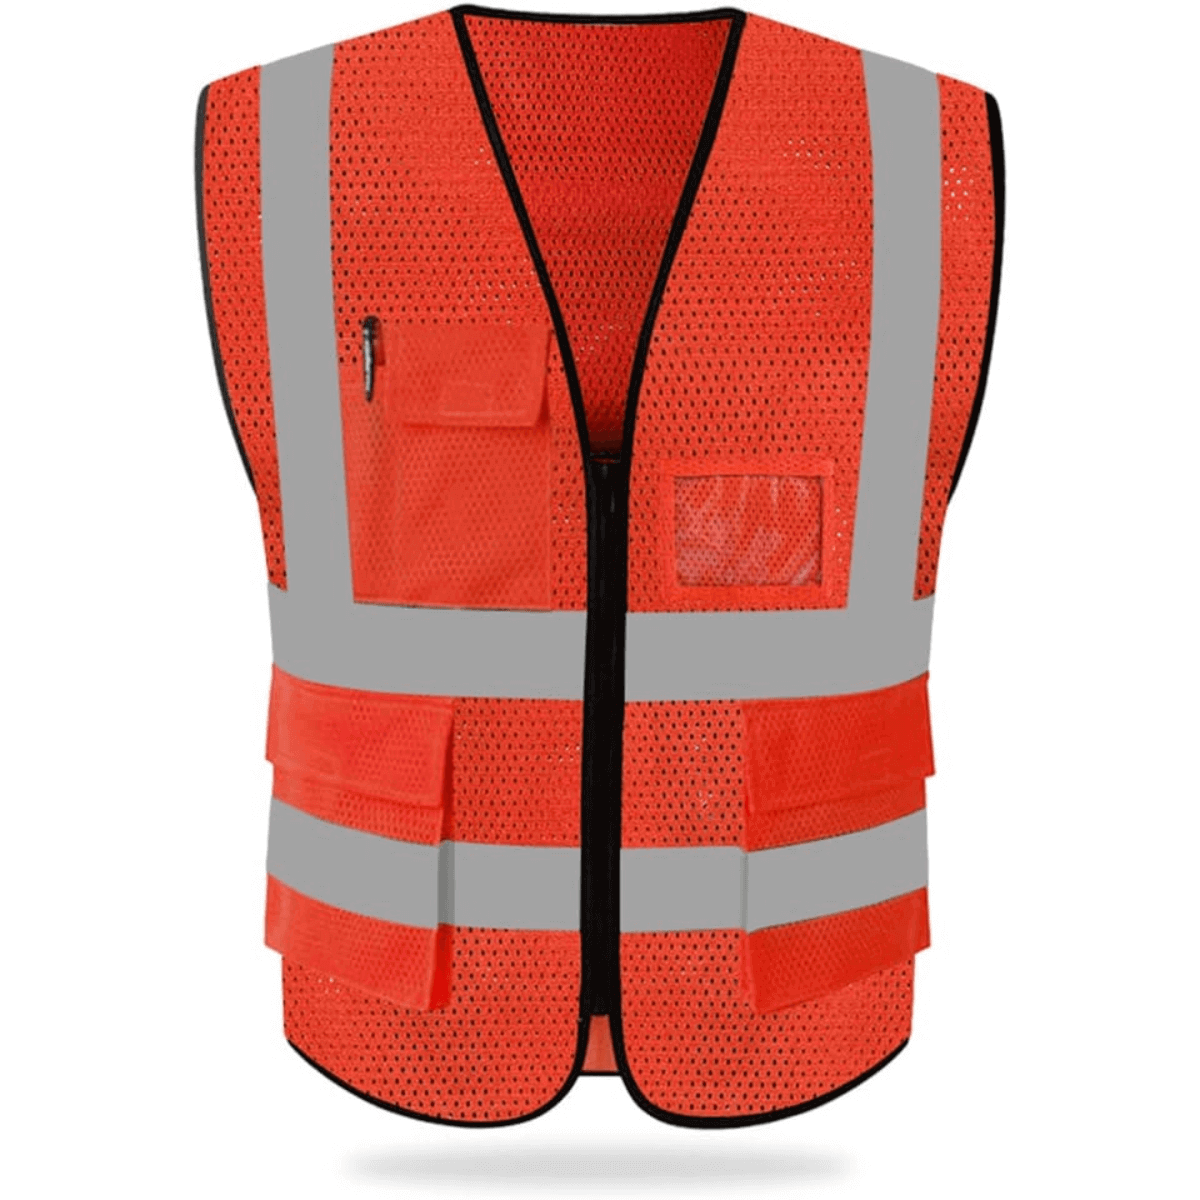 ANSI/ISEA Mesh Reflective Safety Vest with Pockets and Zipper